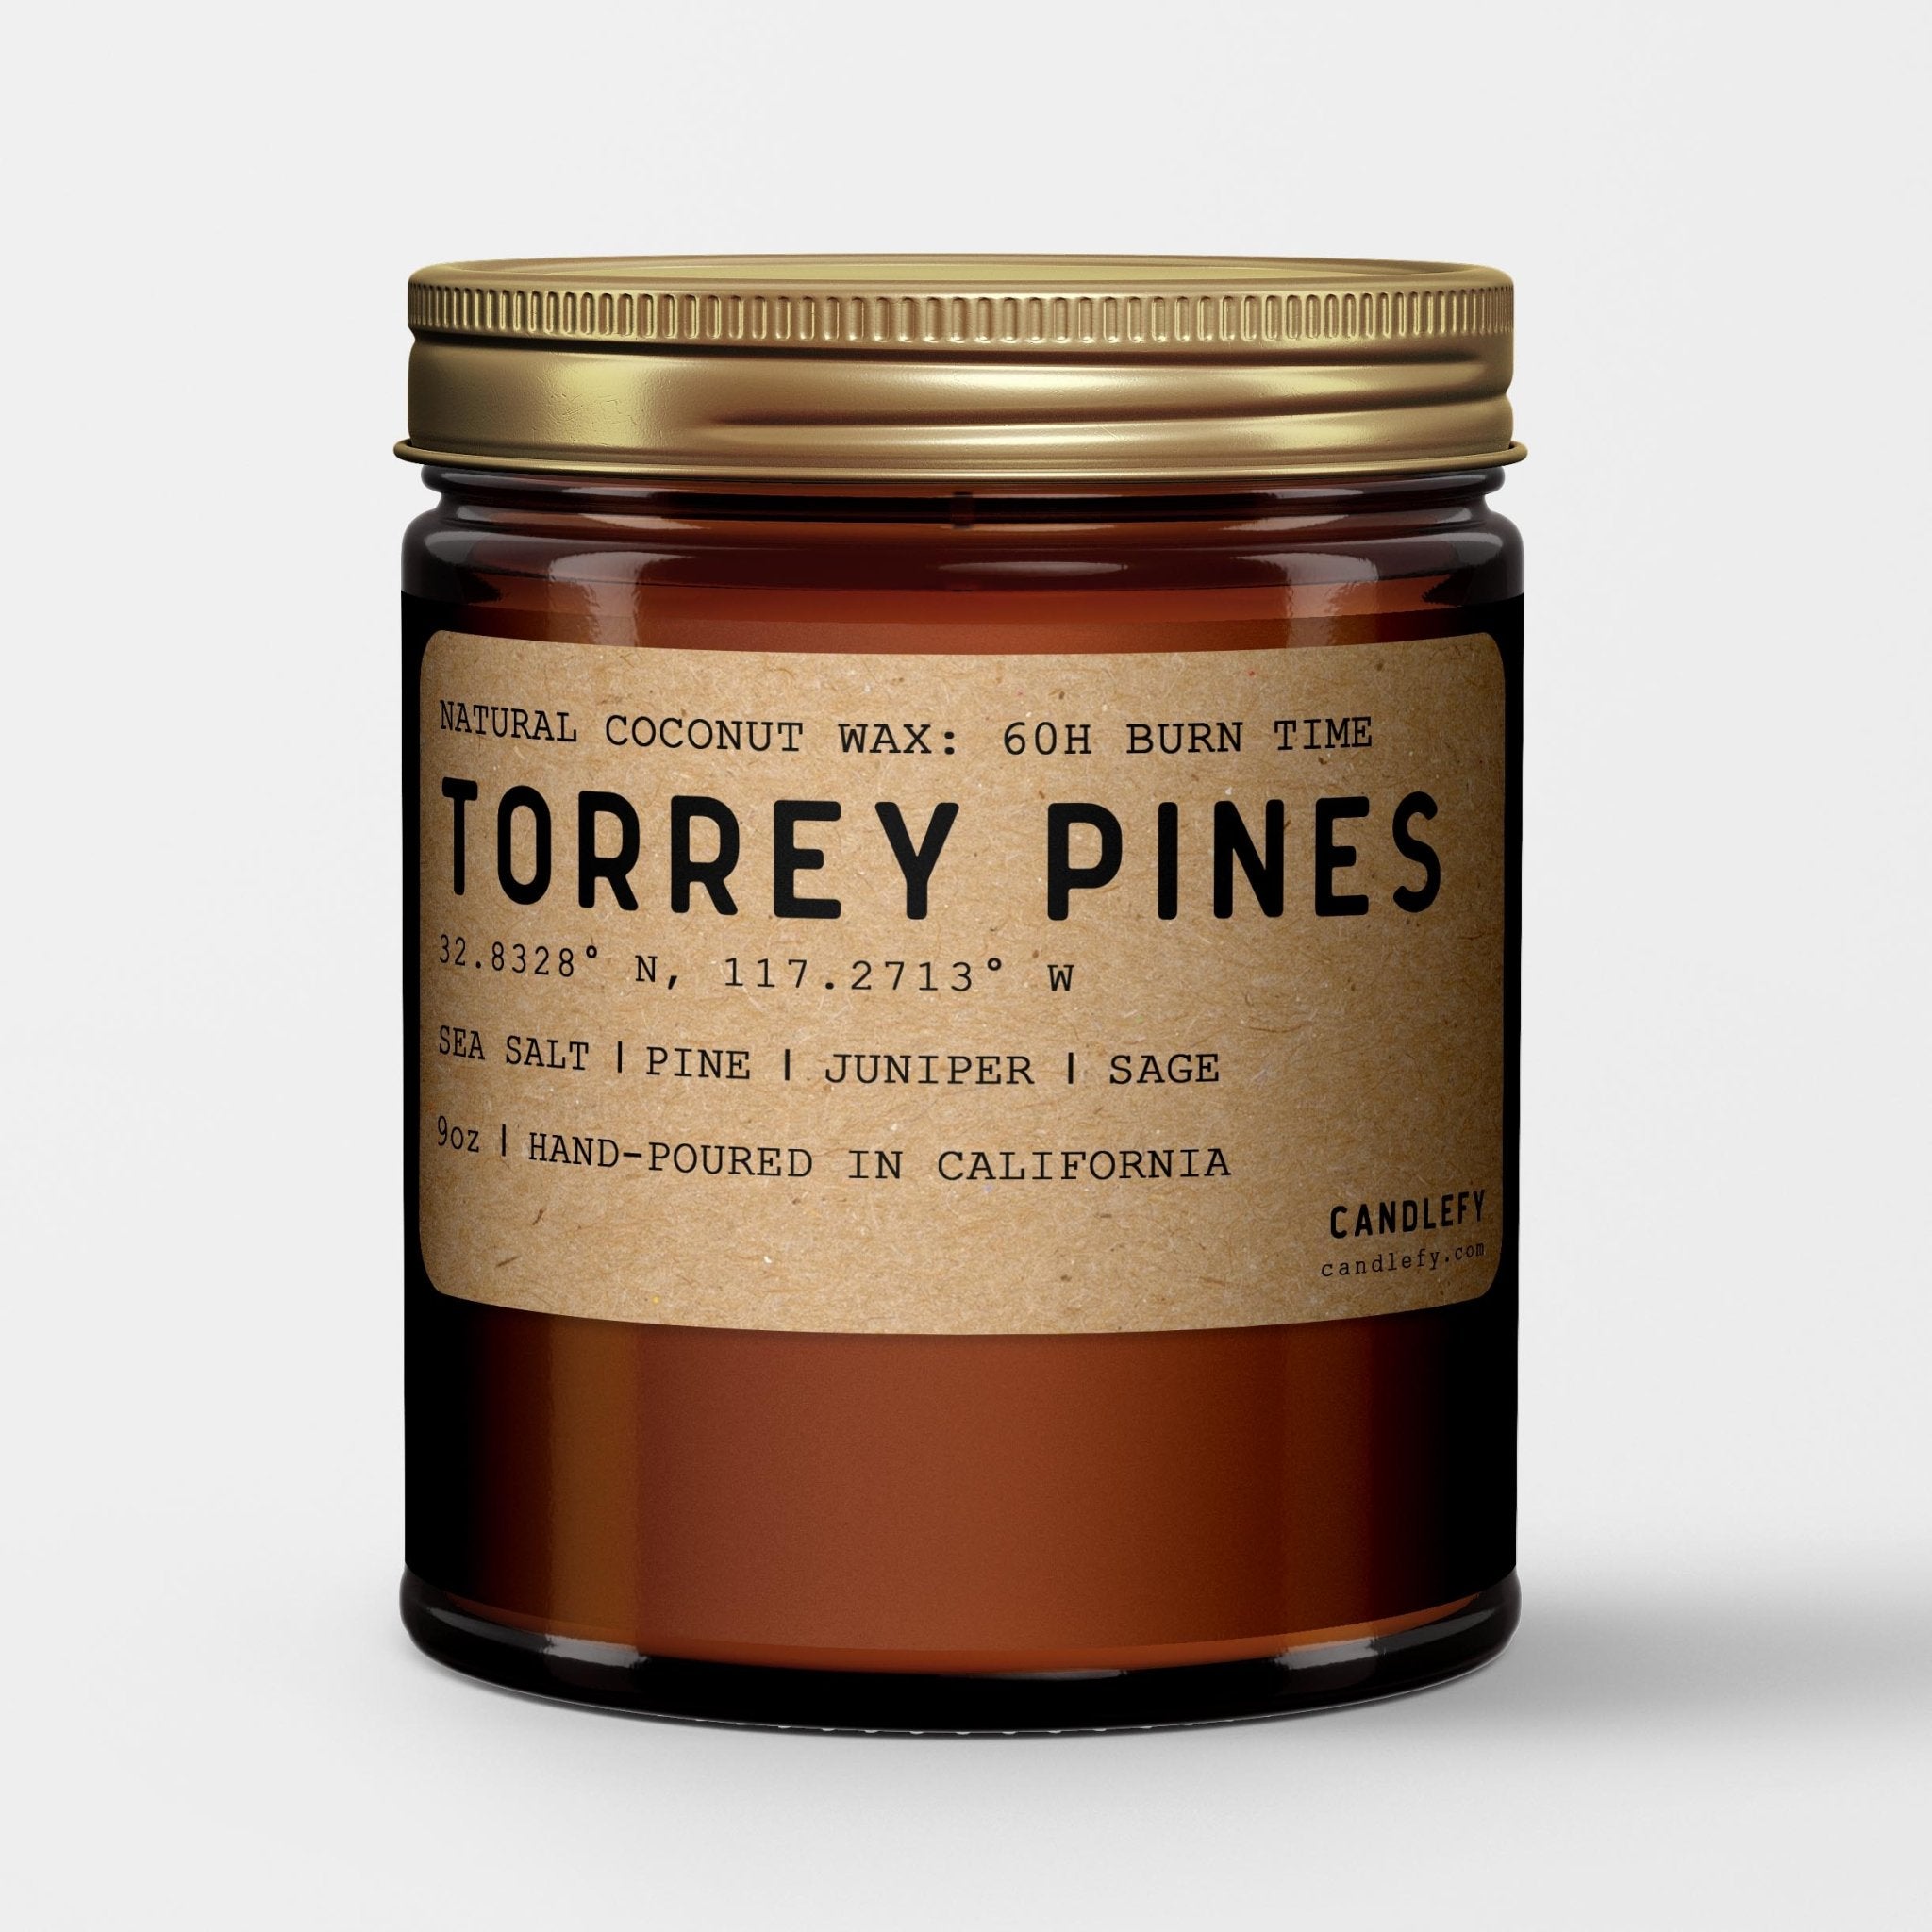 Torrey Pines: California Scented Candle - Candlefy